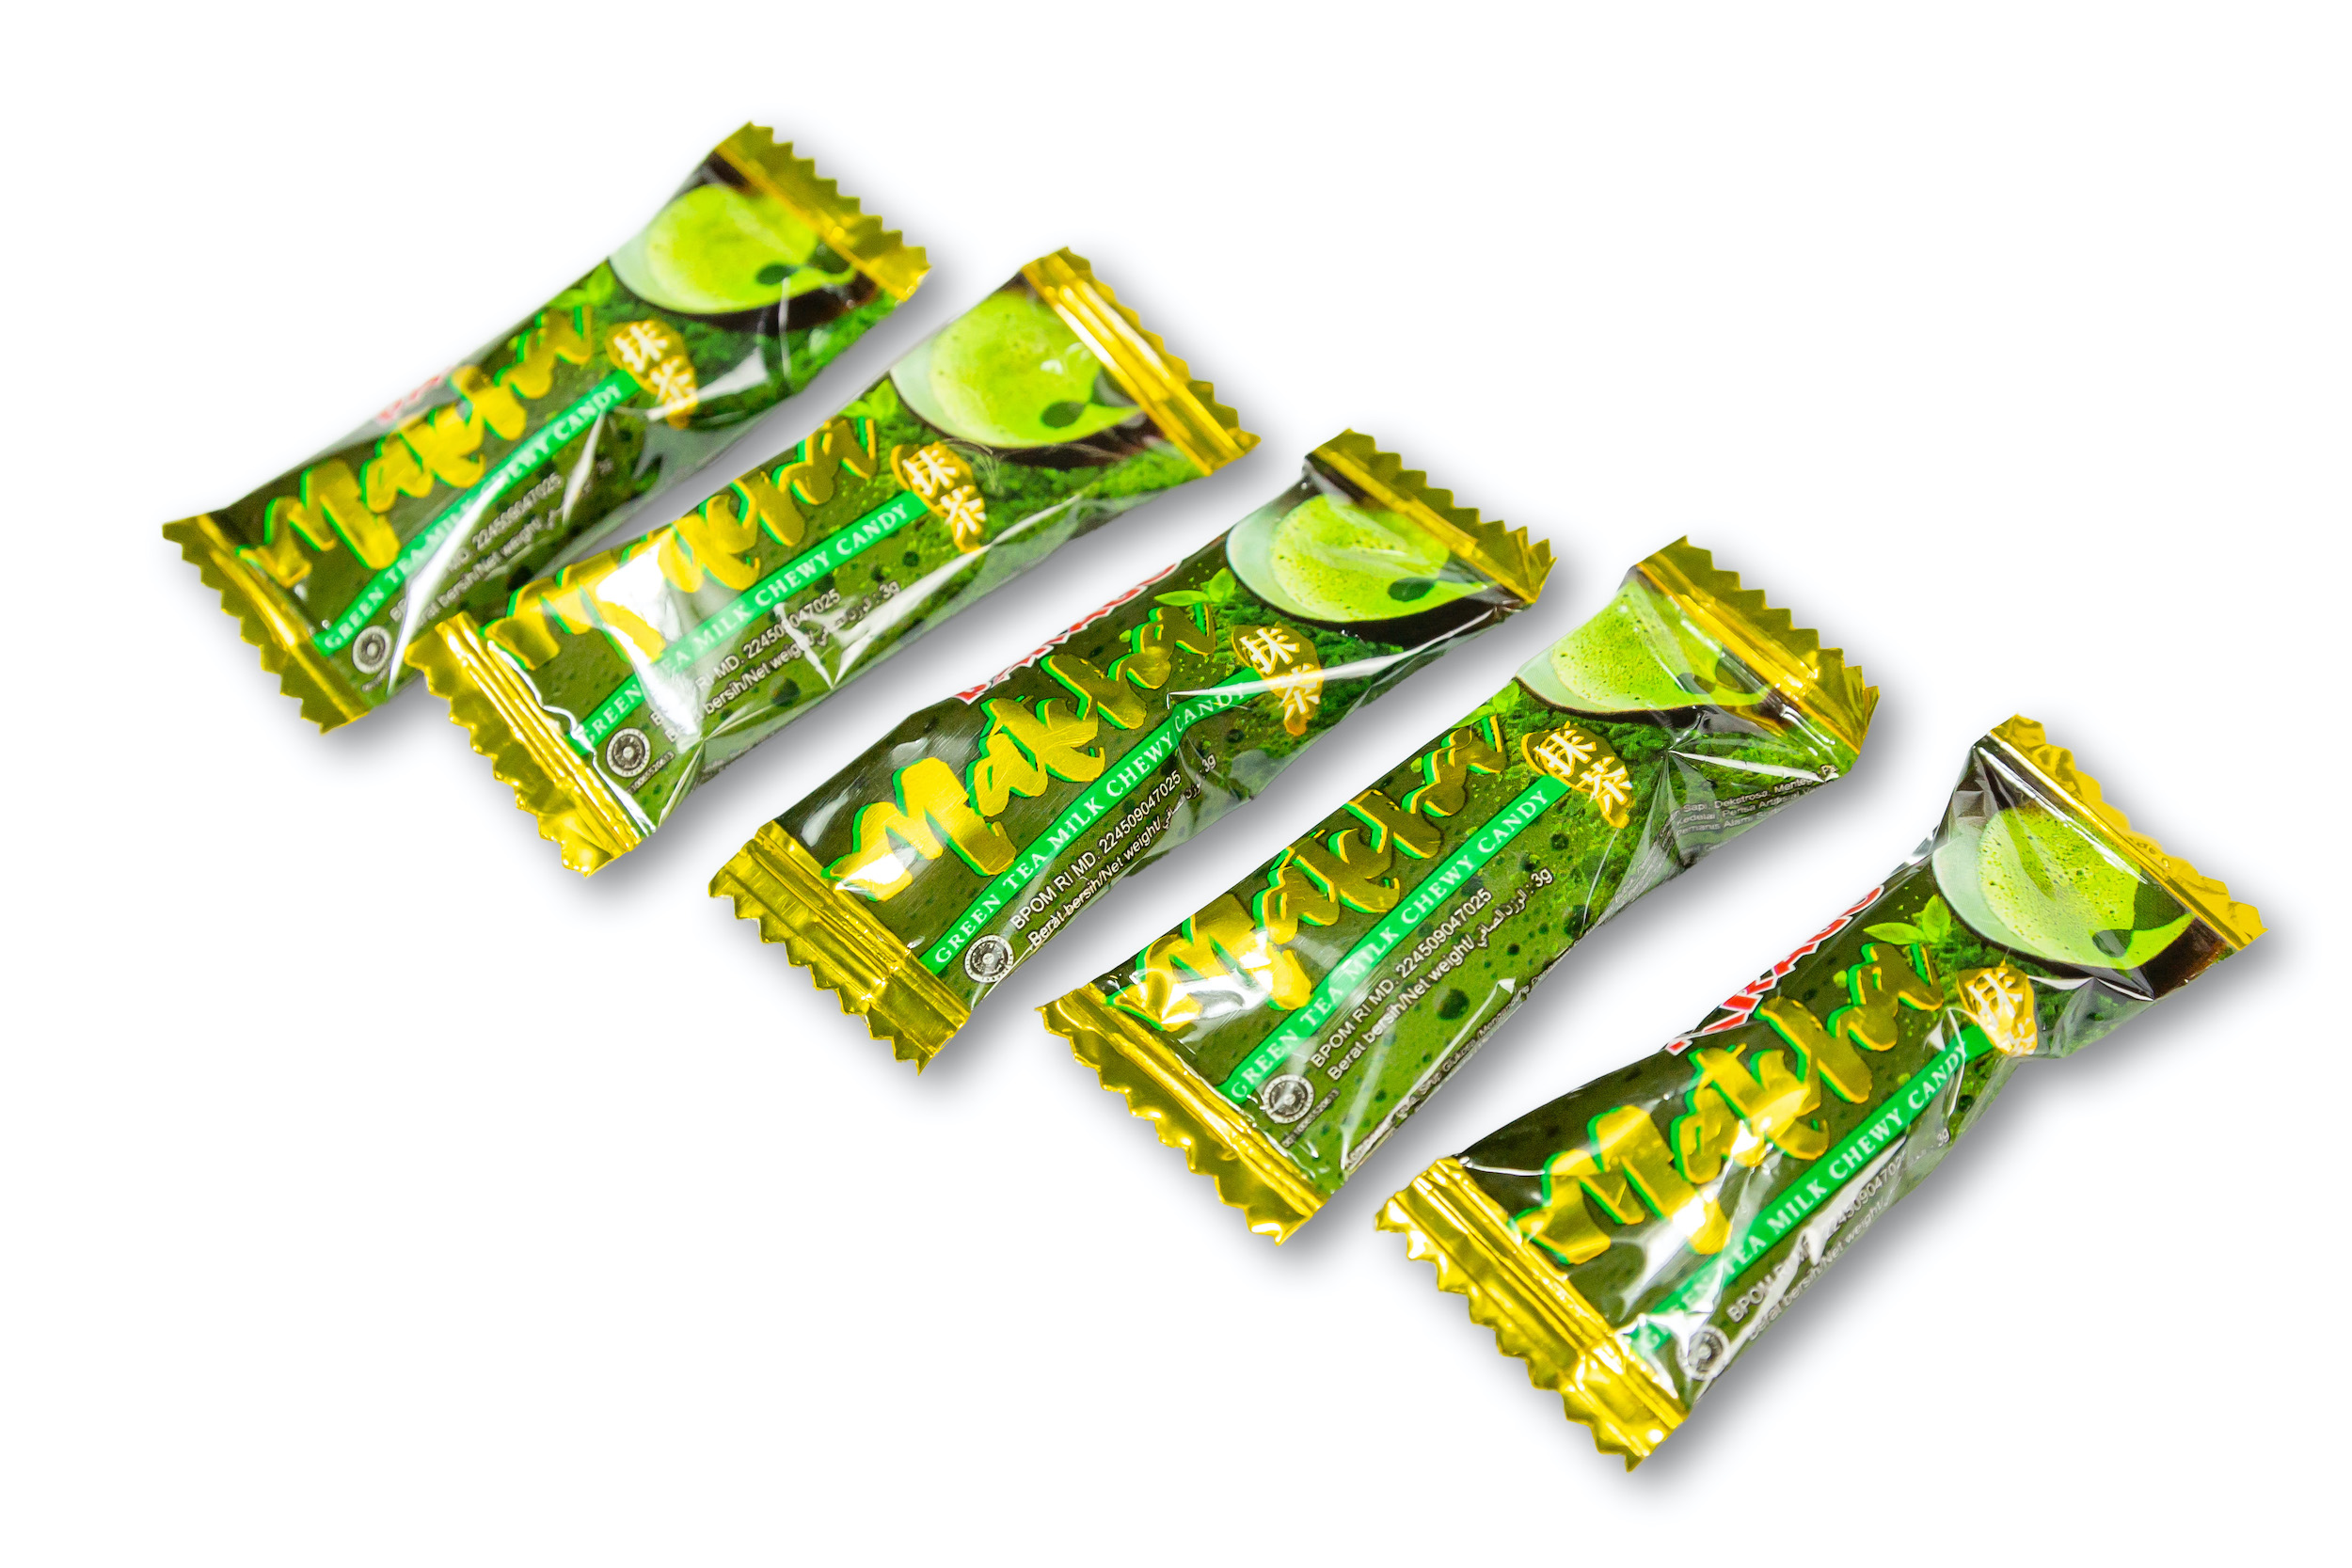 A chewy, non-stick candy loved by adults and kids, made from authentic Japanese matcha powder and natural plant colorant. Cholesterol and fat free, it is a delicious and healthy snack which will give you a deep, satisfying experience from the harmonious blend of matcha powder and milk. With its not overly sweet flavour and smooth texture, Parago Chewy Matcha is a special treat that will make any occasion sweeter.   Ingredients Sugar, Glucose syrup (contains Sulphite preservative), Milk Powder, Beef Gelatine stabilizer, Dextrose, Butter, Modified Starch, Matcha Extract (1%), Salt, Nature Identical Matcha Flavour, Soya Lecithin emulsifier, Artificial Vanilla Flavour, Natural Colourant Copper Chlorophyllin CI. 75815 (contains Antioxidant Tocopherol, Natural Sweetener Sorbitol)  Package content - 10bags @90g @3g - 12cans @120g @3g - 20bags @120g @3g